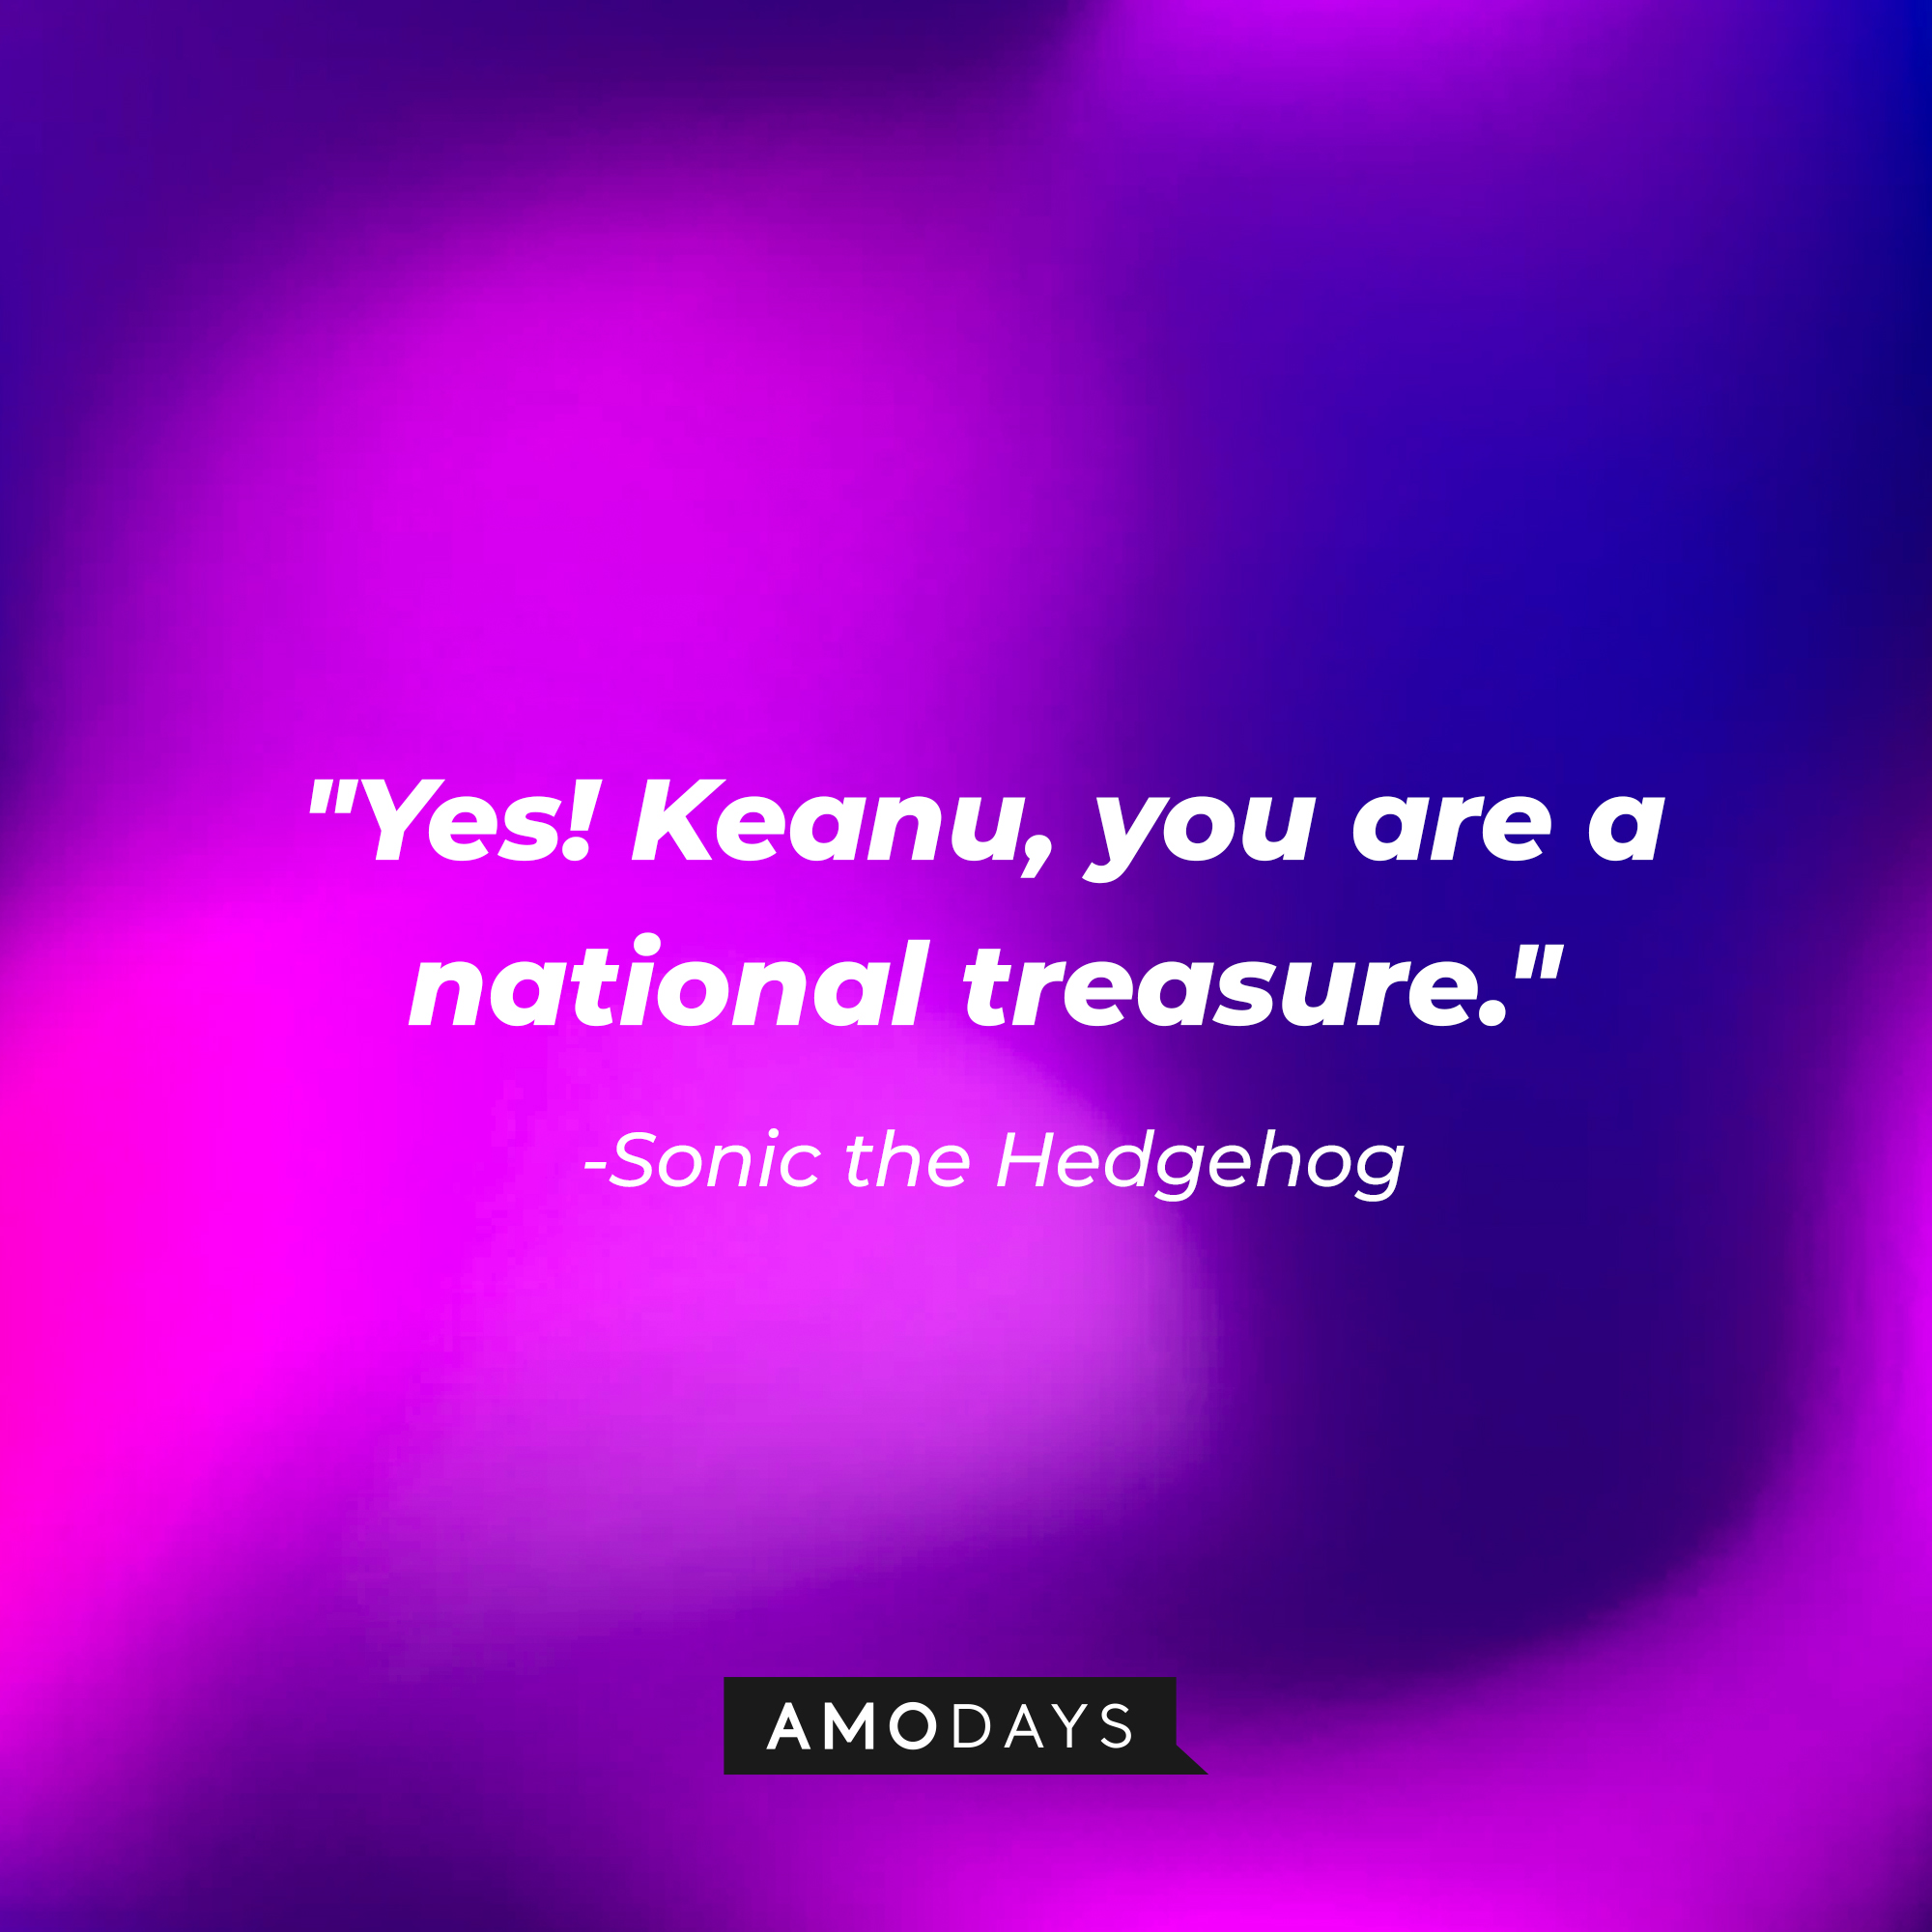 Sonic's quote: "Yes! Keanu, you are a national treasure." | Source: Amodays